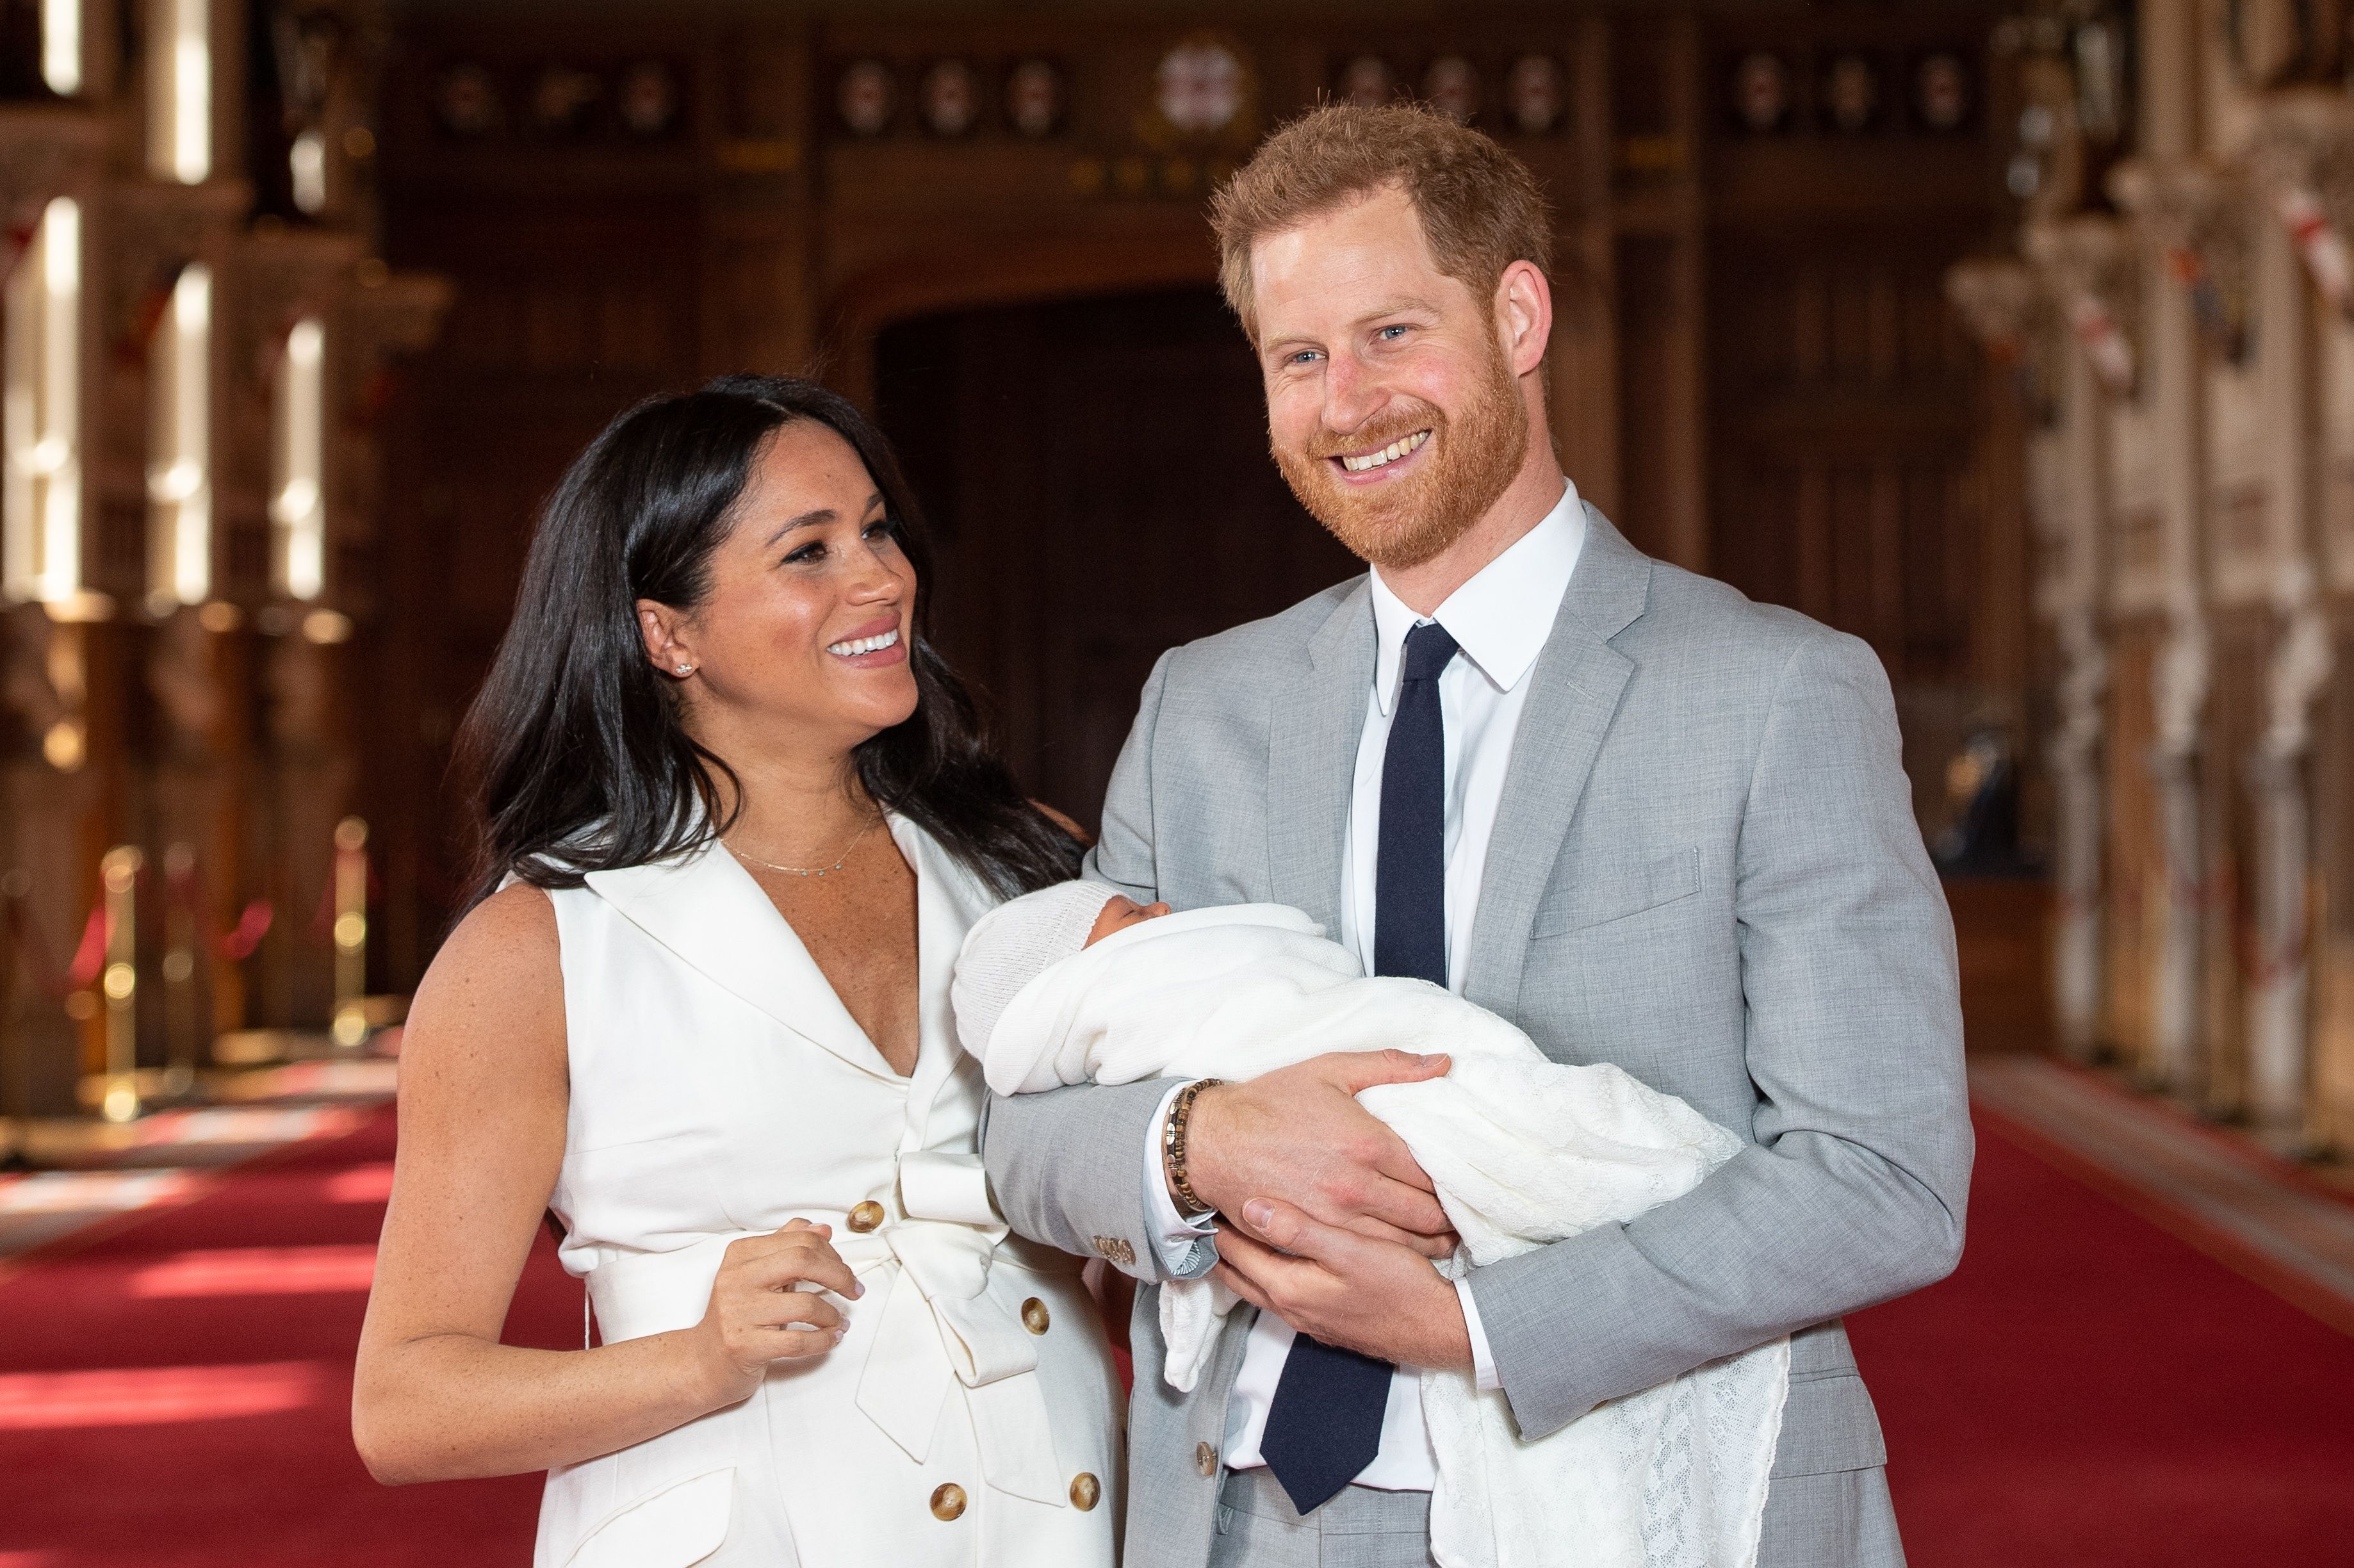 Prince Harry, duke of Sussex, Biography, Facts, Children, & Wedding